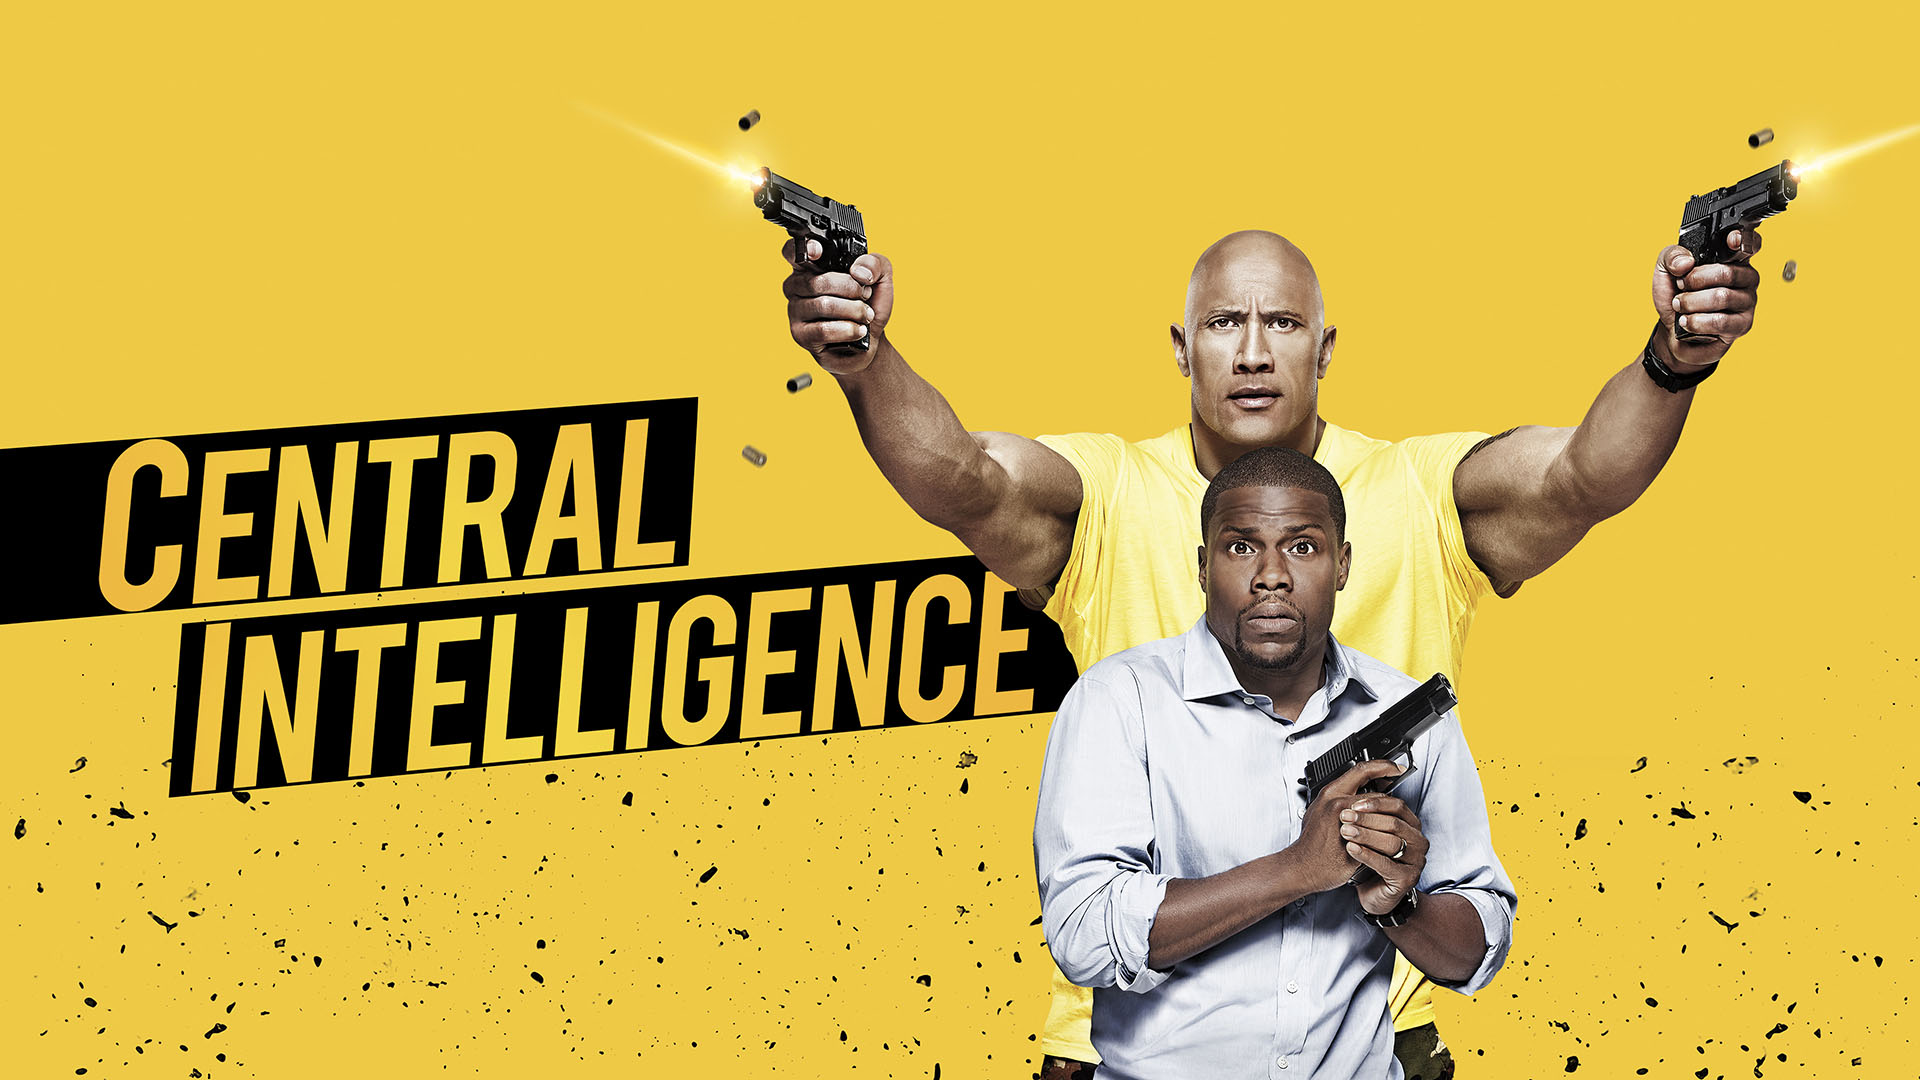 Watch Central Intelligence Online | Stream Full Movies